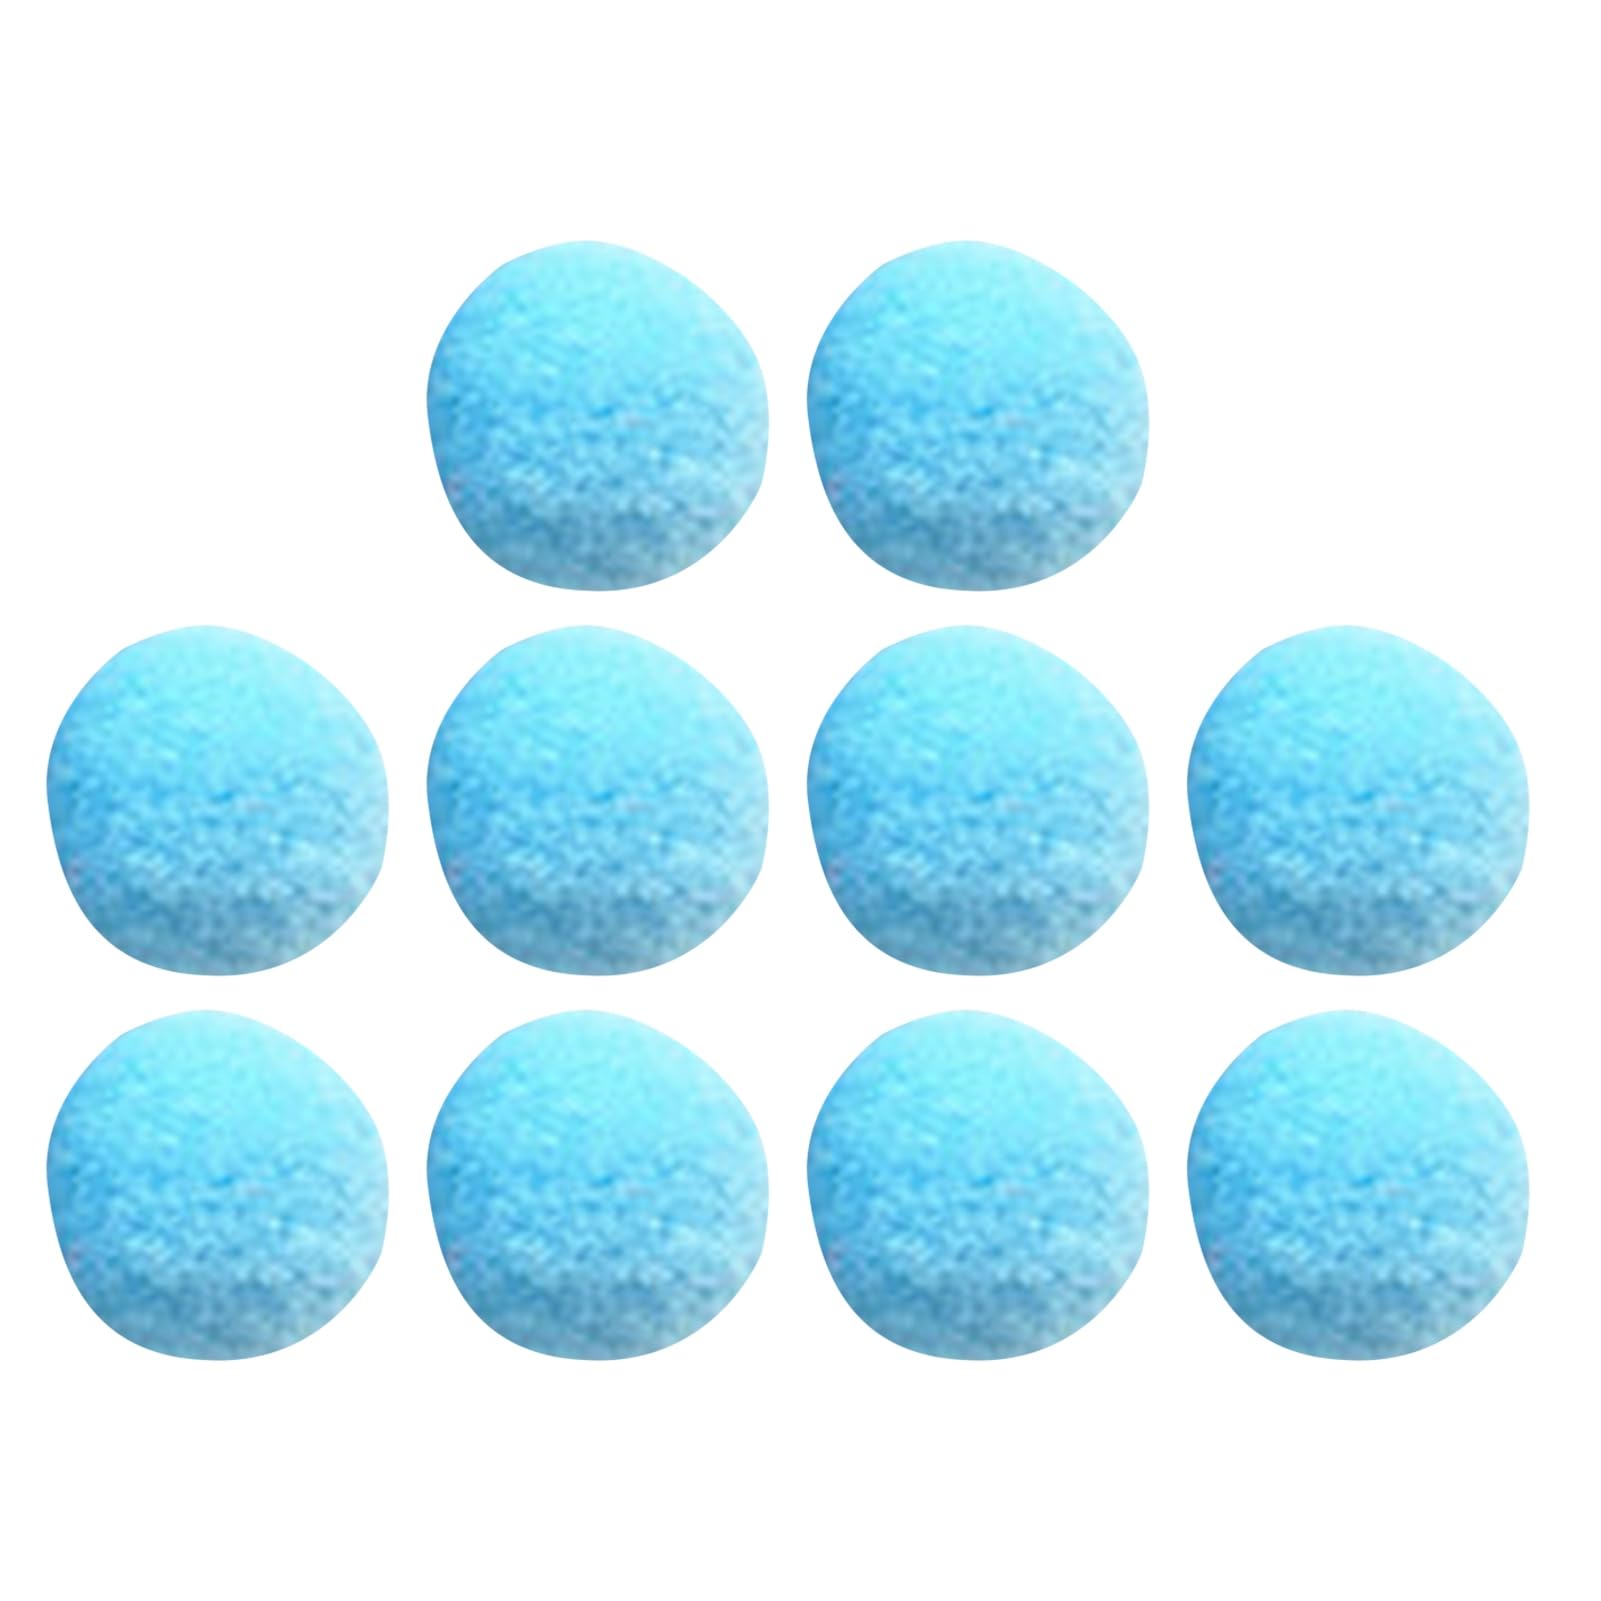 Grebest Water Balloons,Reusable & Rapid Fill Water Soaker Balls-Summer Pool Games Fight Toys for Kids Teens Boys Girls Lake Blue